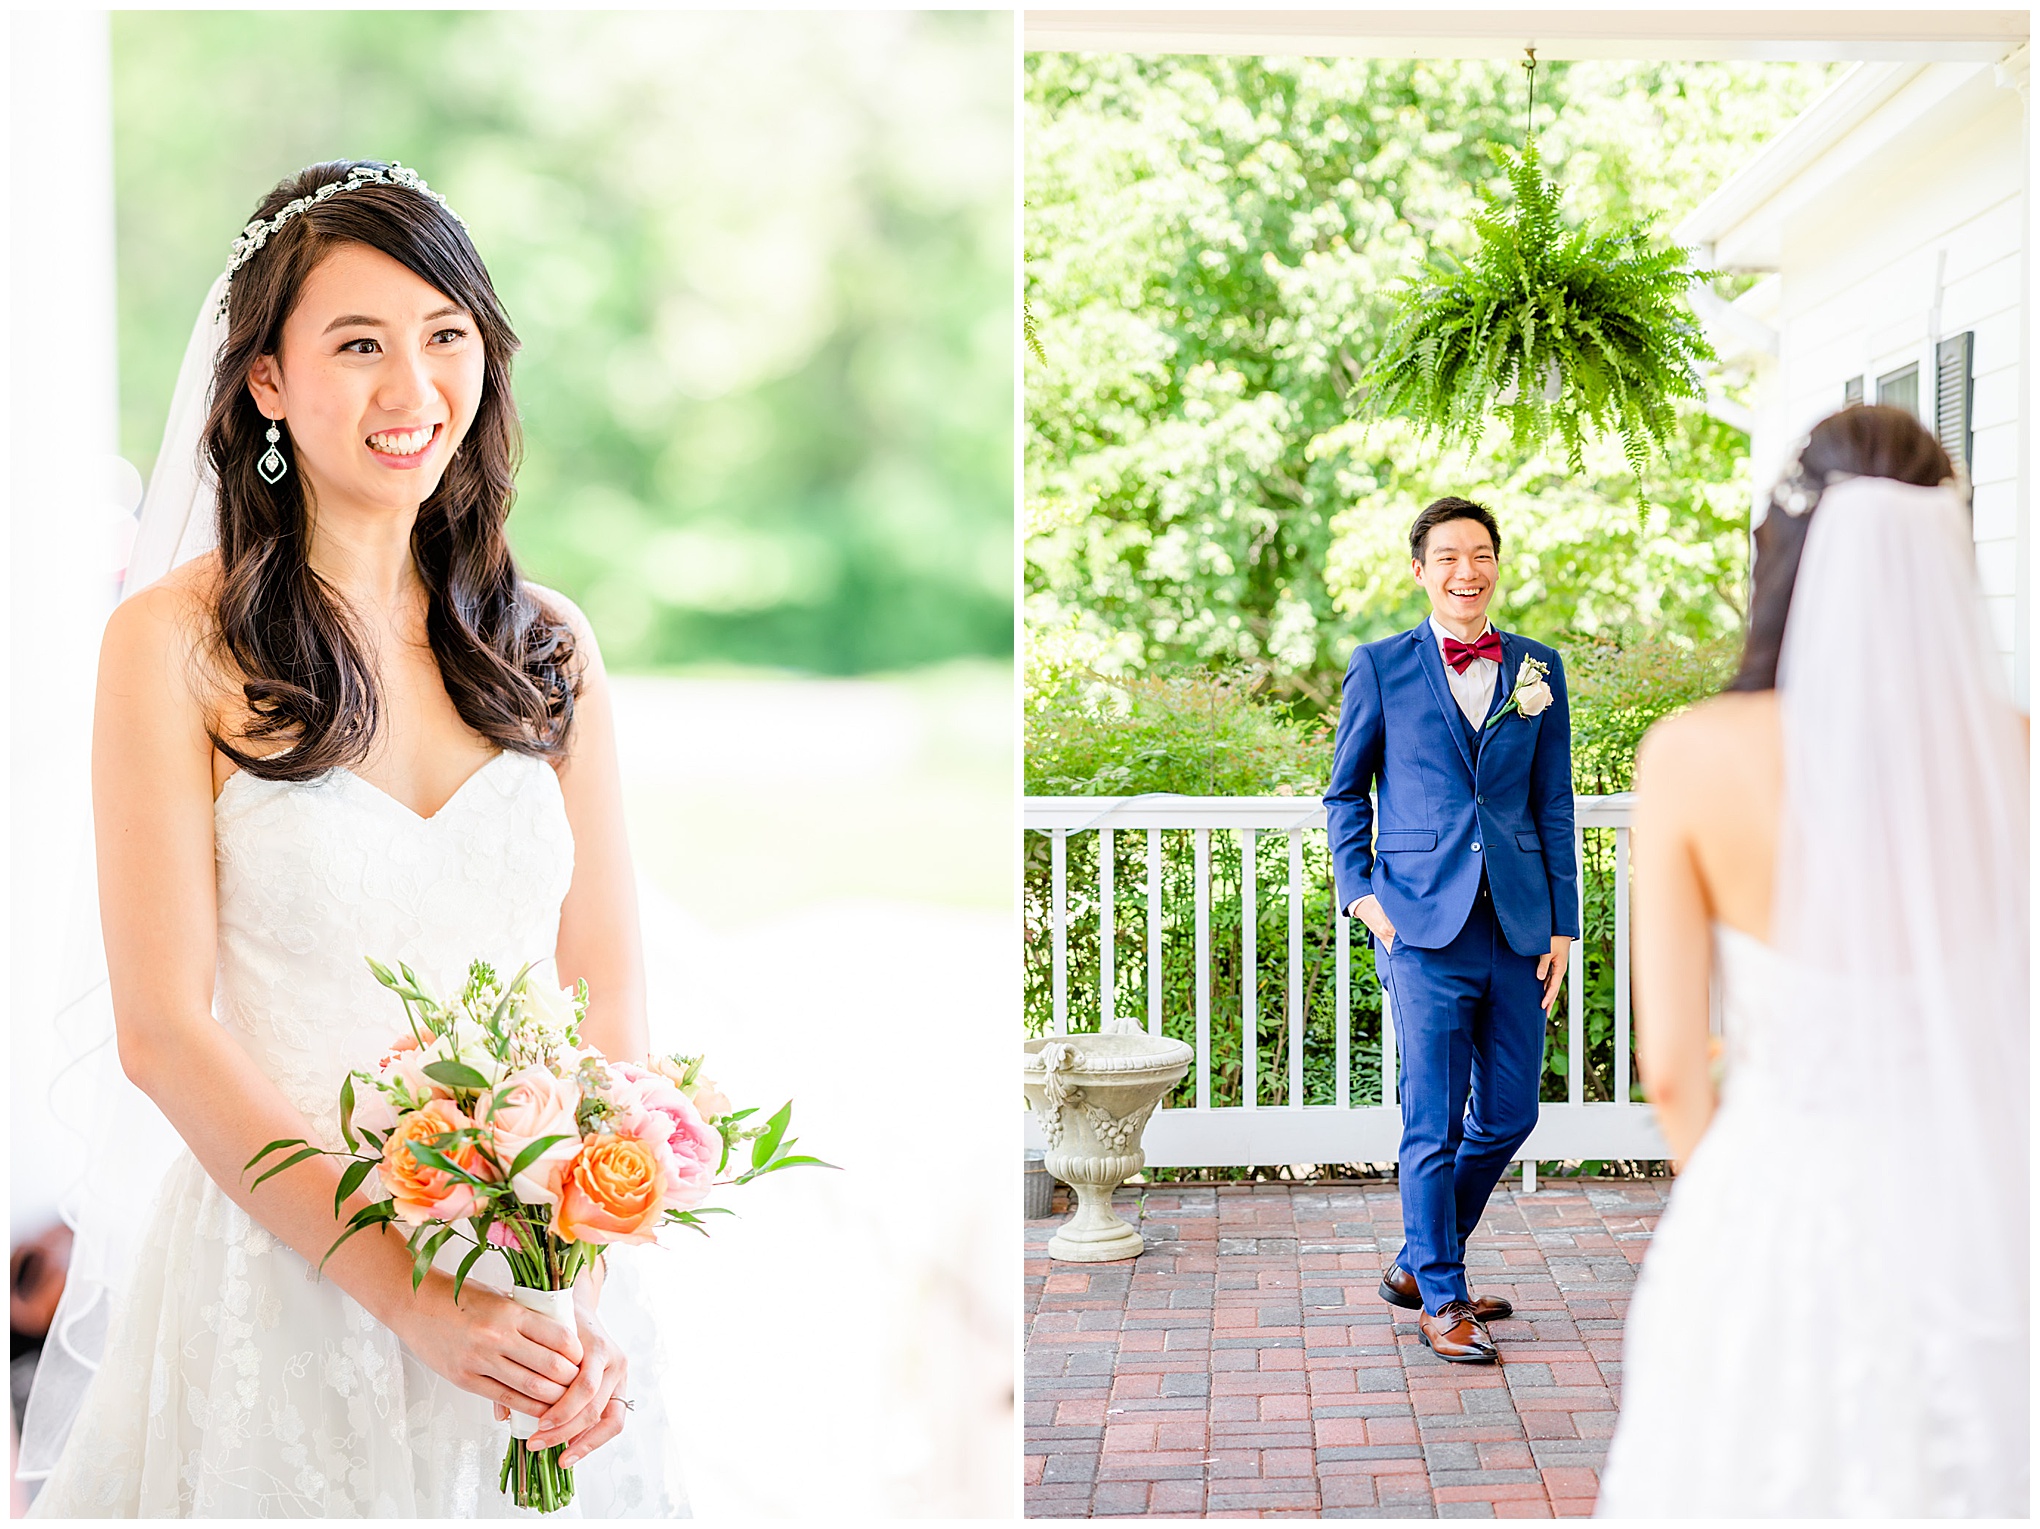 spring Westfields Golf Club wedding, Clifton Virginia wedding, northern Virginia wedding venue, DC wedding photographer, DC photographer, Virginia country club wedding, spring wedding aesthetic, Chinese American wedding, Rachel E.H.Photography, bride and groom doing first look, groom smiling